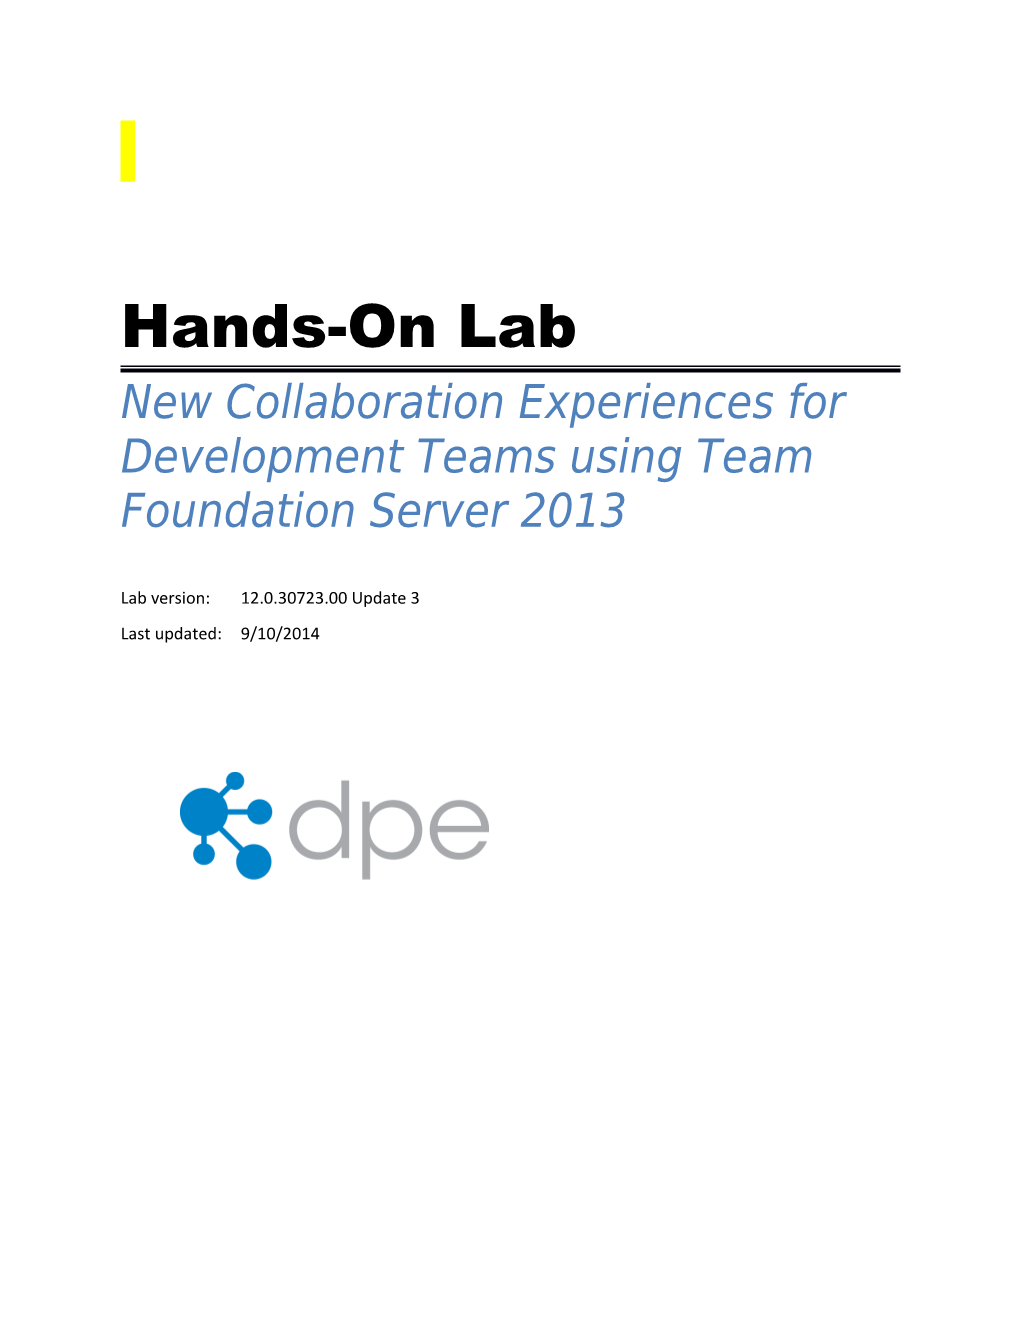 New Collaboration Experiences for Development Teams Using Team Foundation Server 2013